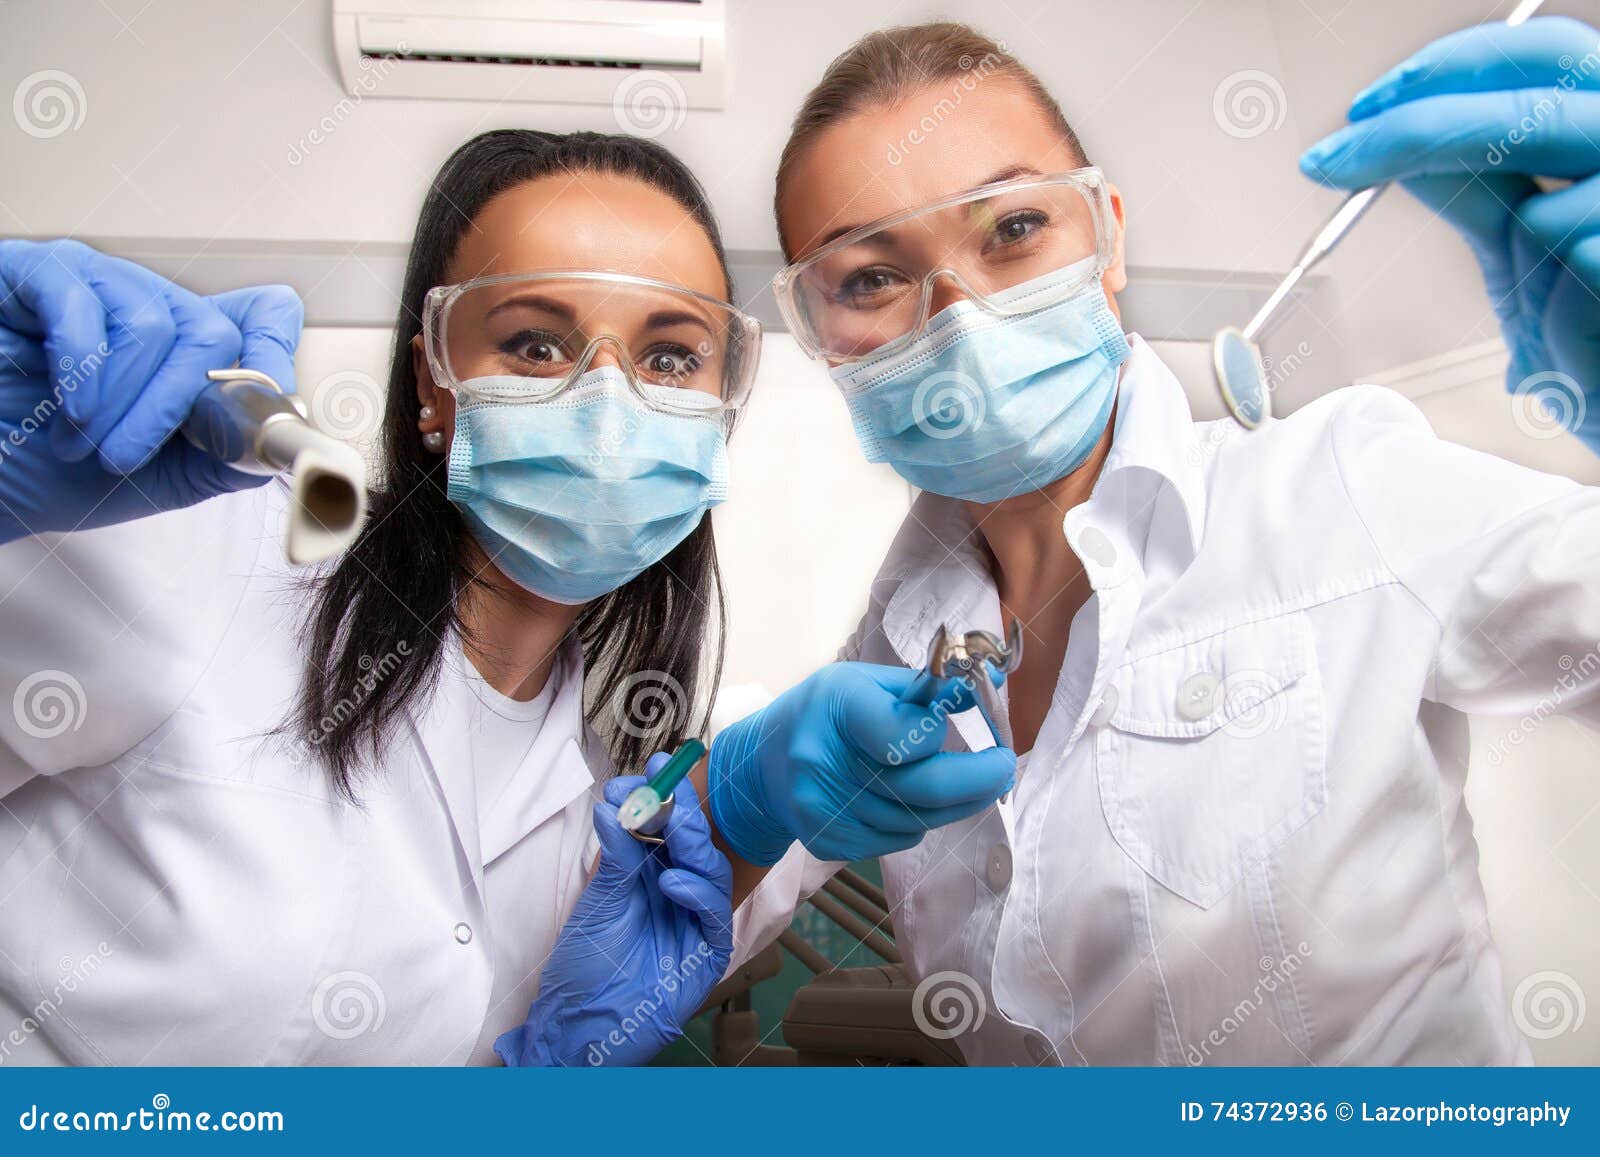 female doctor dentist and assistant in masks looking at camera